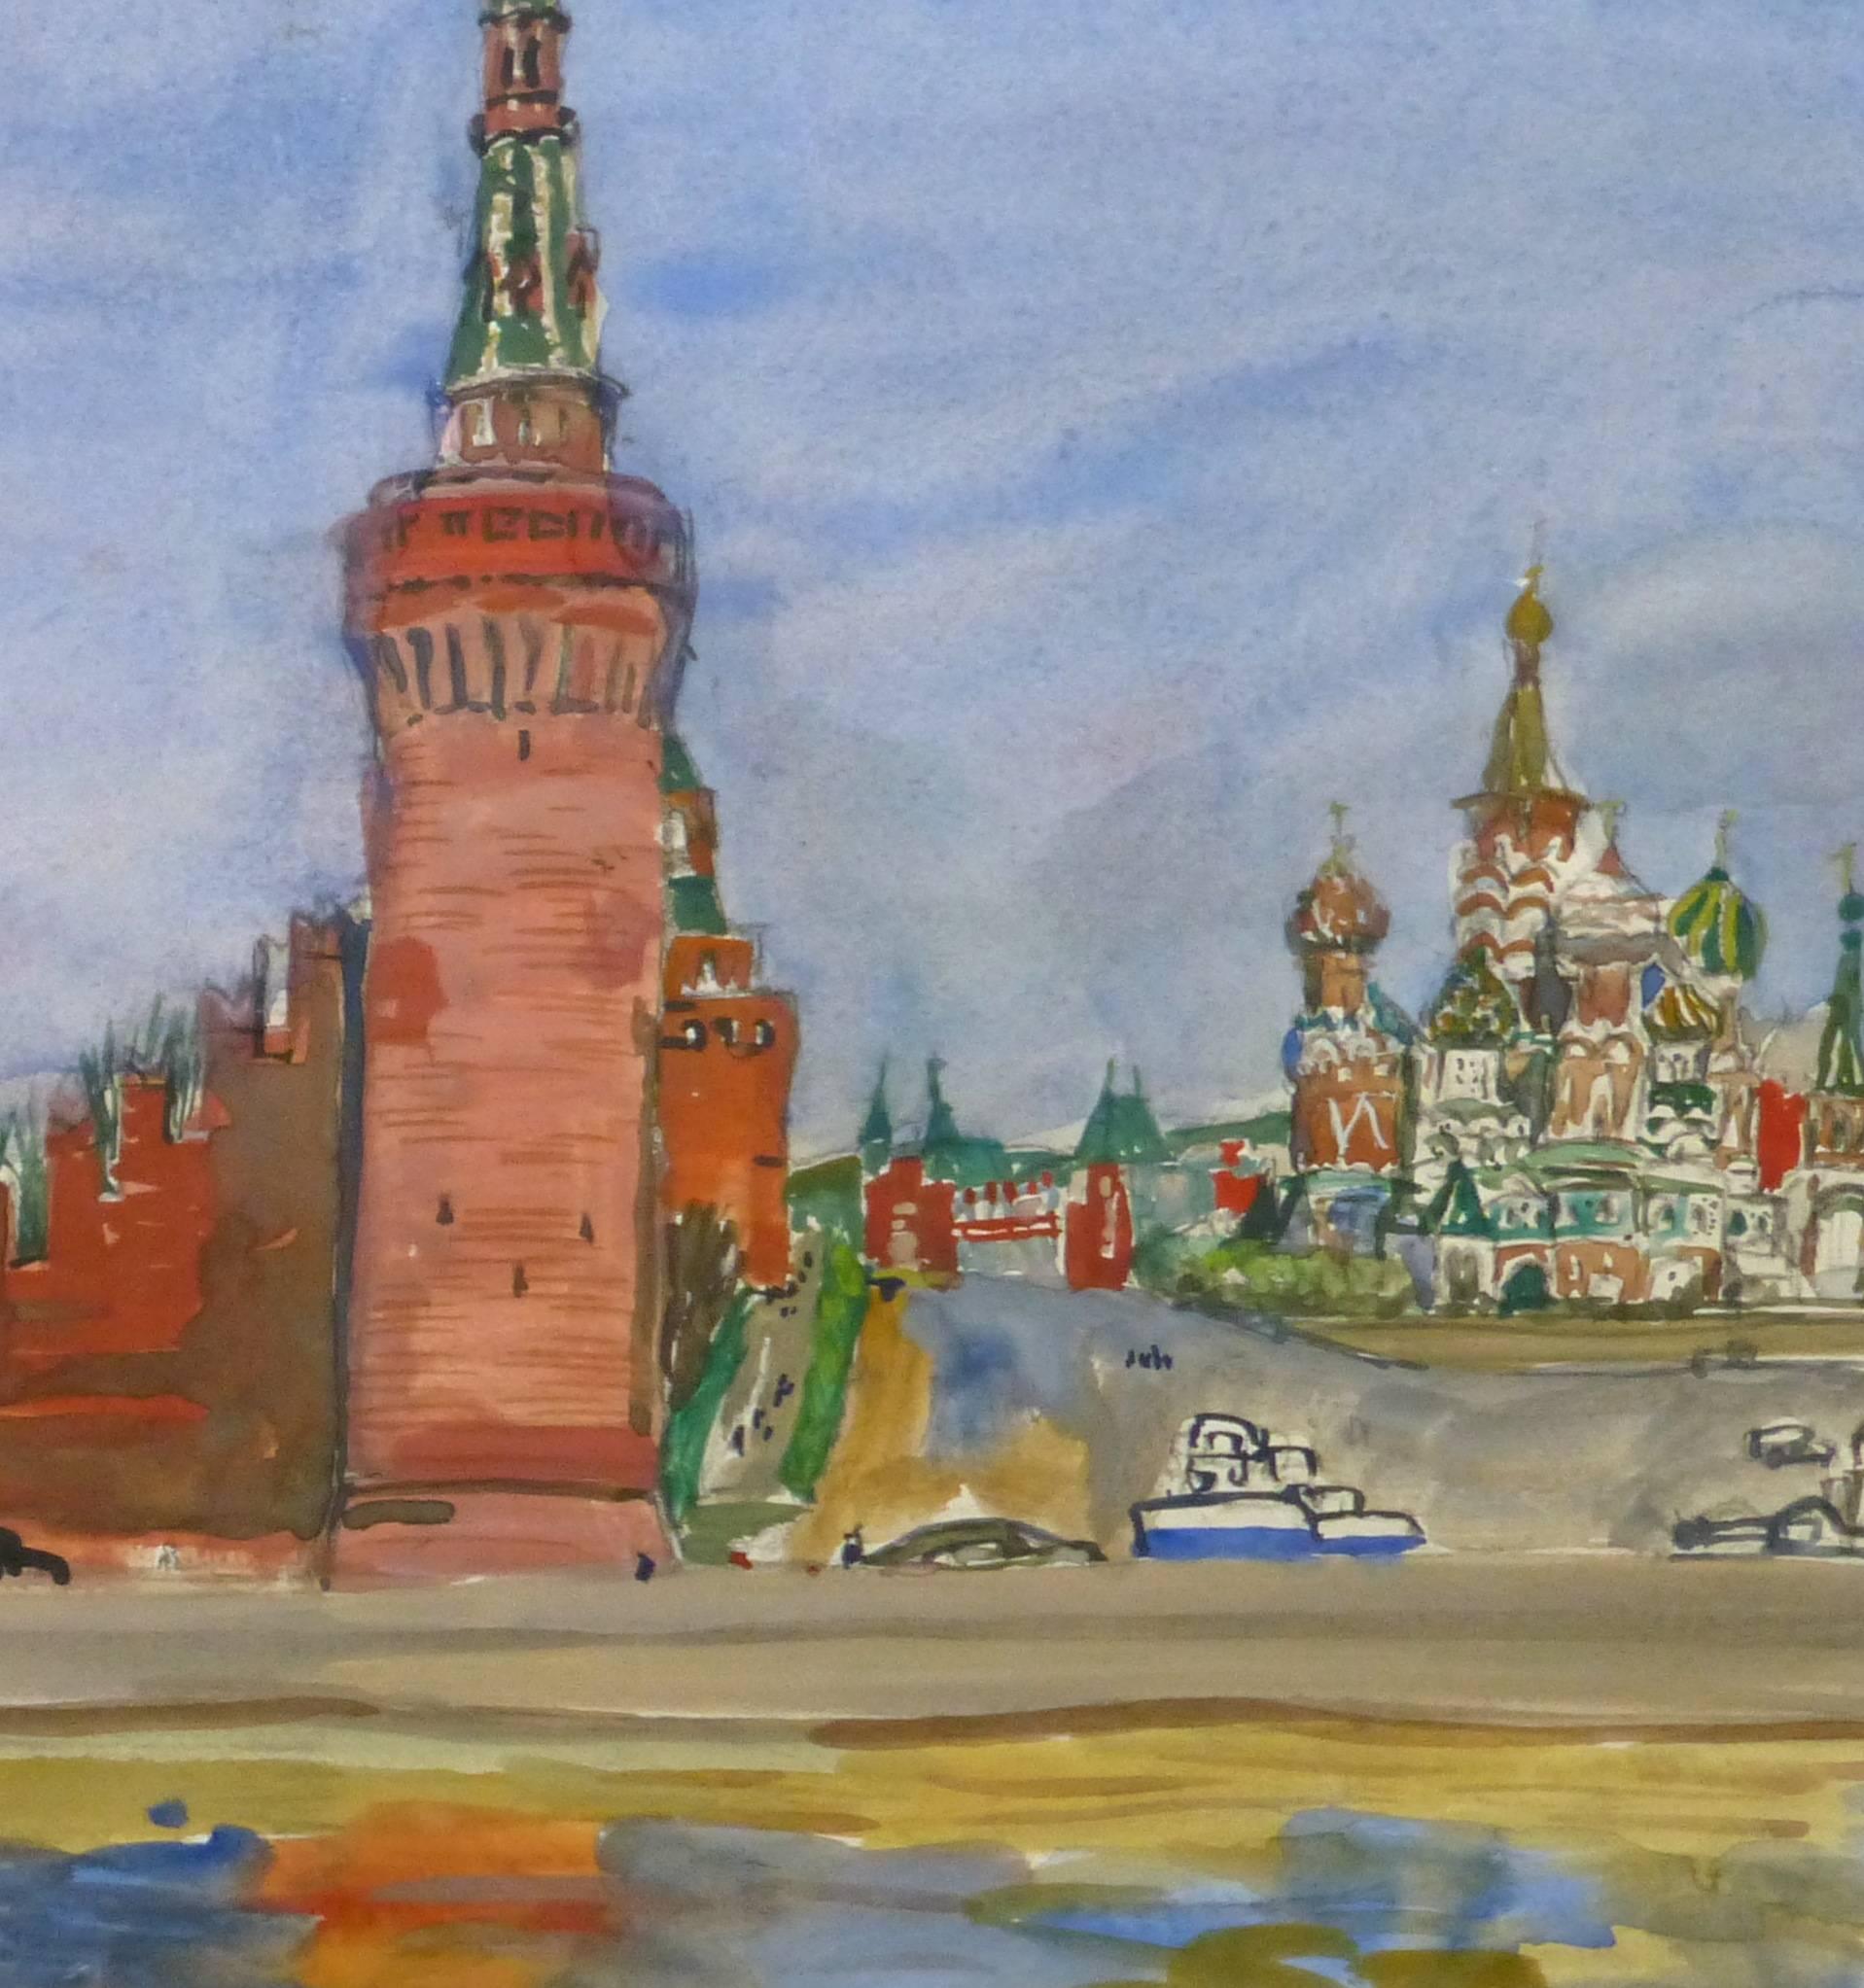 Vivid gouache and tempera landscape of the famed wall of Kremlin, Russia, the  iconic St. Basil's Cathedral can be seen in the background, circa 1950.

Original artwork on paper displayed on a white mat with a gold border. Archival plastic sleeve